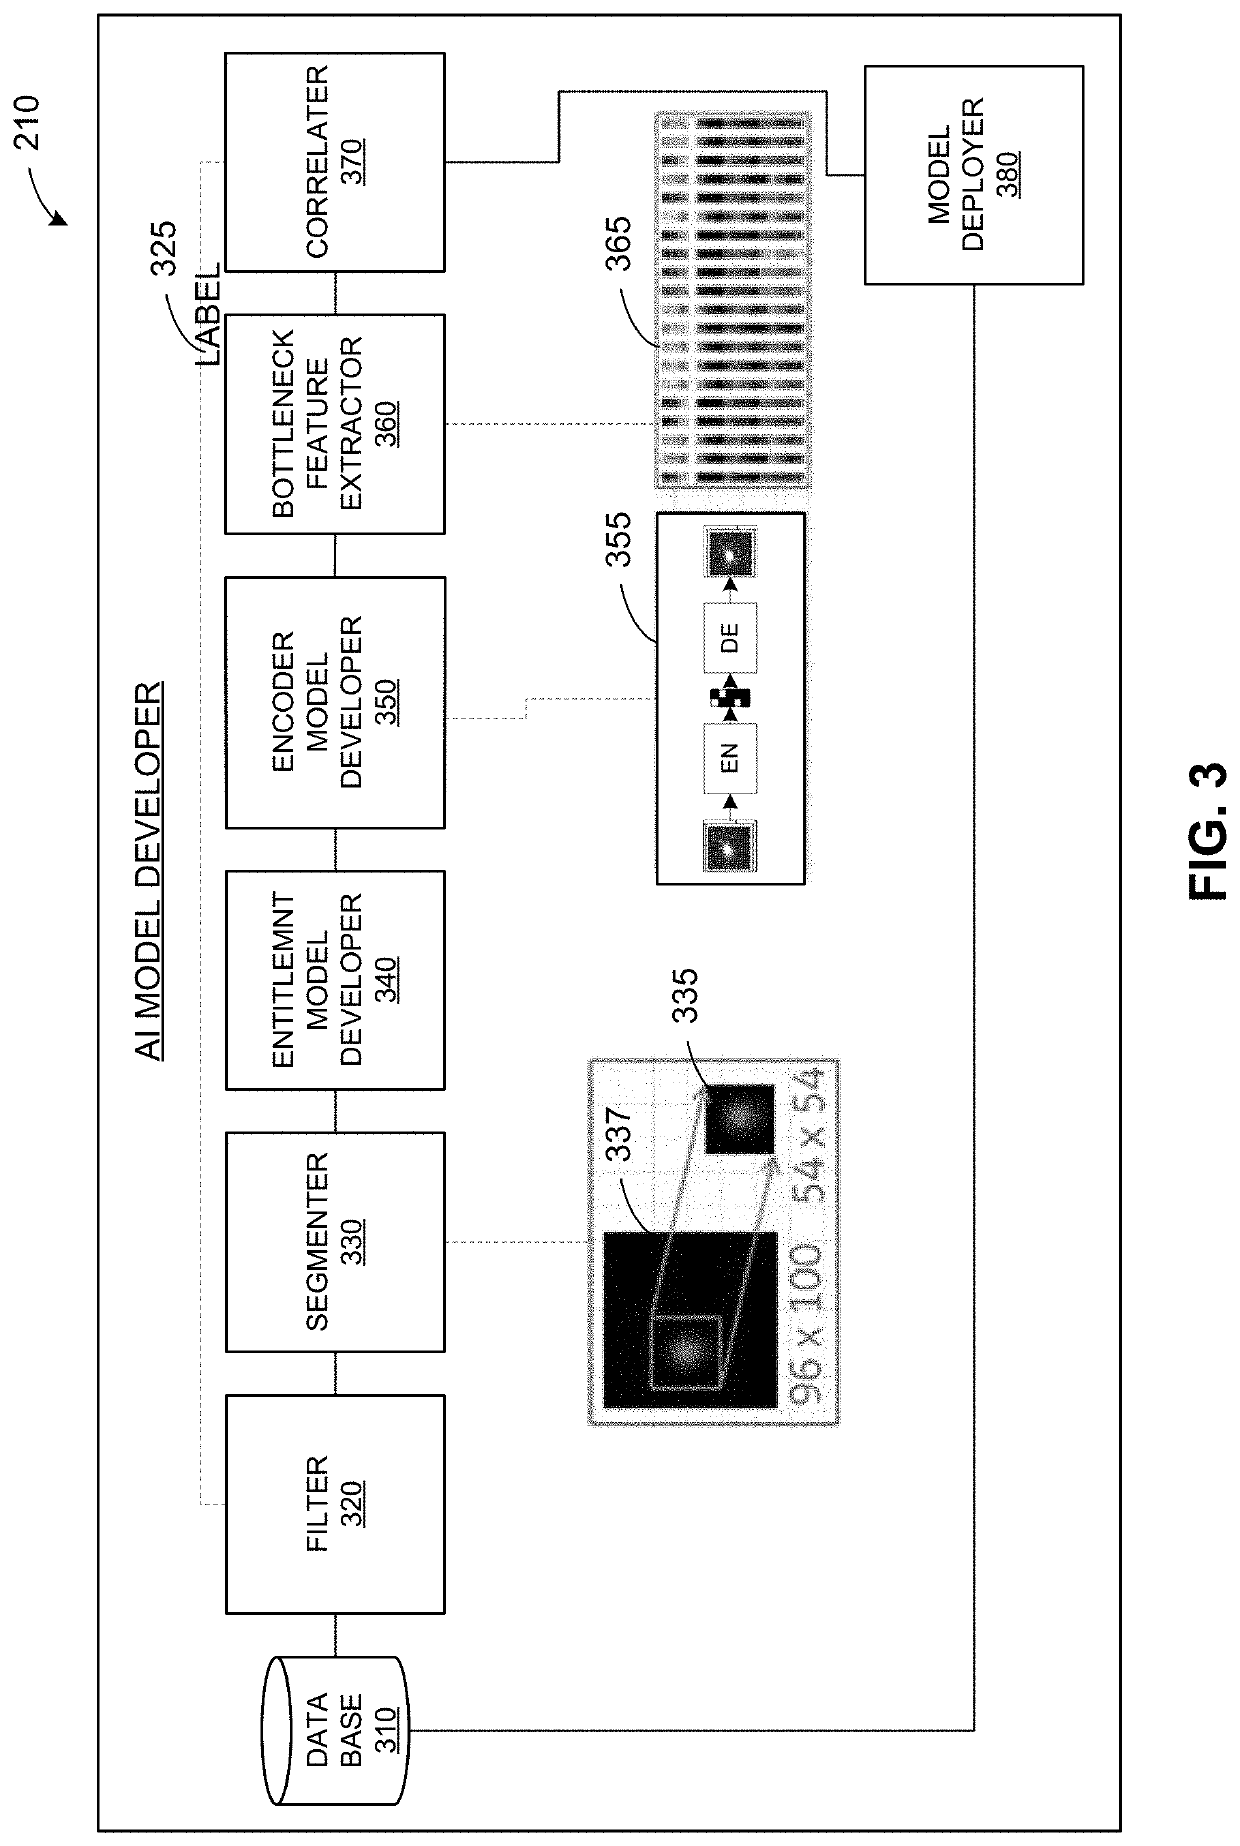 Systems and methods for compression, management, and analysis of downbeam camera data for an additive machine